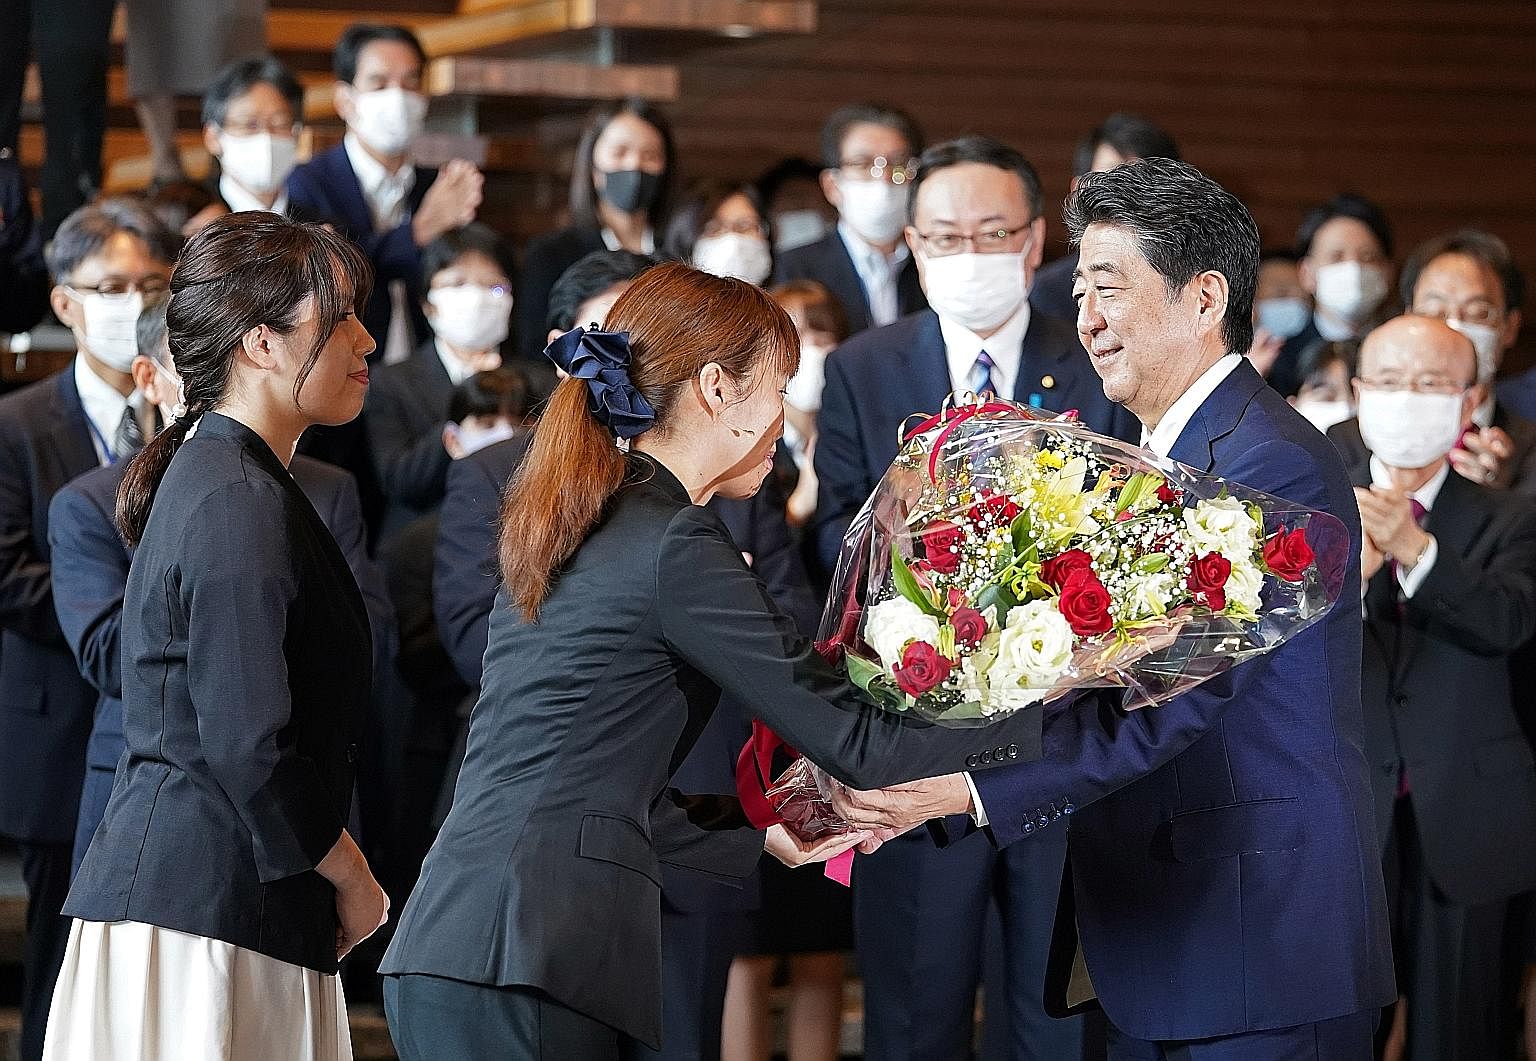 Mr Shinzo Abe, Japan's longest-serving leader with 3,188 days at the helm, called time on his tenure yesterday, receiving a bouquet and a poignant send-off upon his departure from the prime minister's official residence in Tokyo. Mr Yoshihide Suga (c